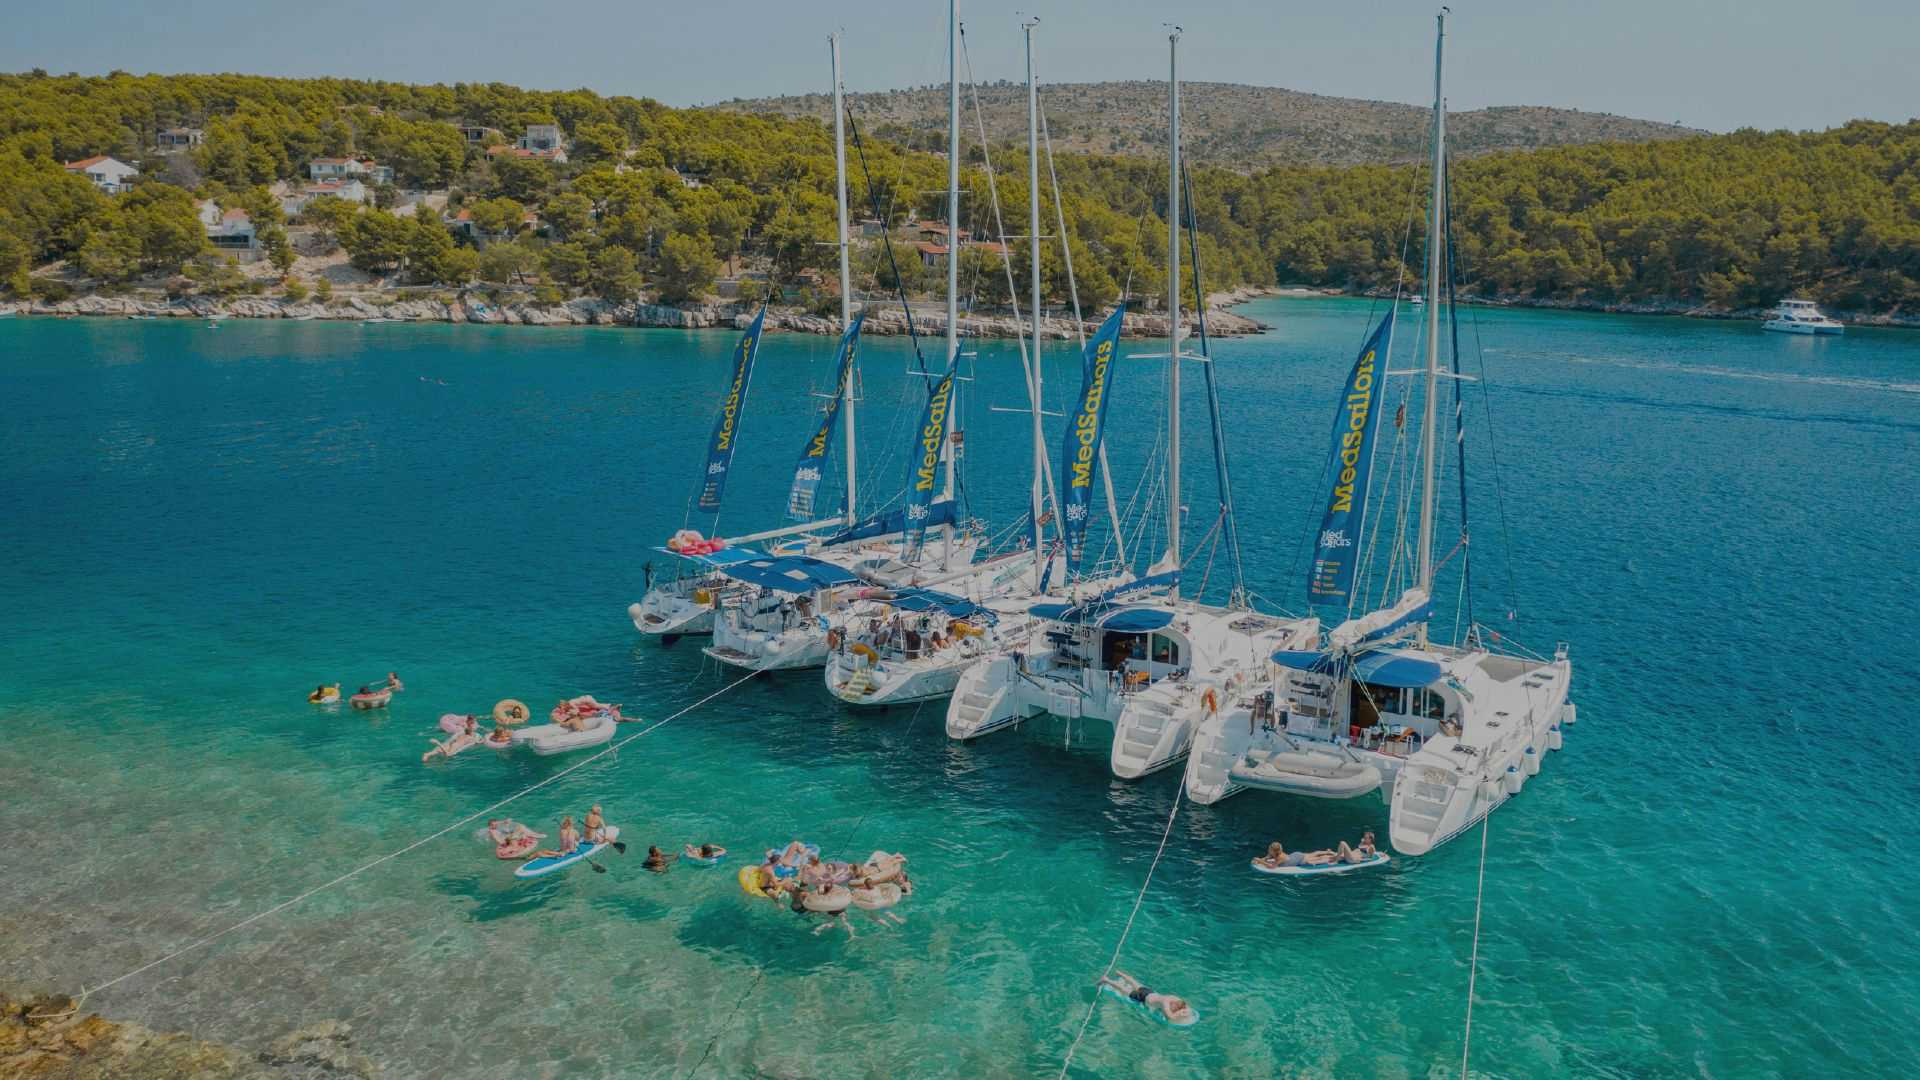 MedSailors yachts anchored together in a bay in Croatia